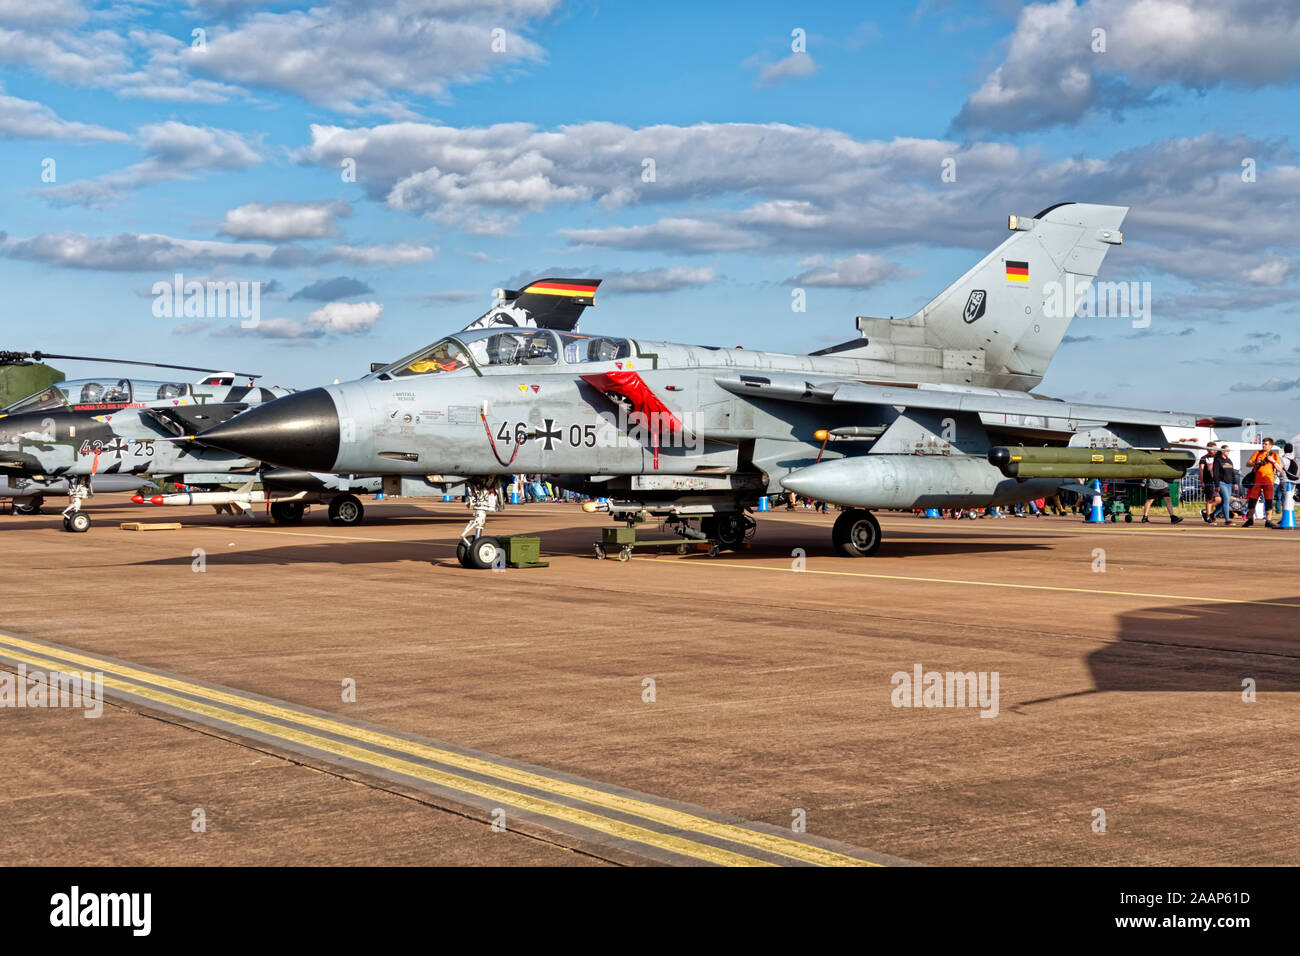 A German Air Force (Luftwaffe) Panavia Tornado IDS (interdictor/strike) fighter-bomber, 46+05 at the RIAT 2019, RAF Fairford, Gloucestershire, UK Stock Photo